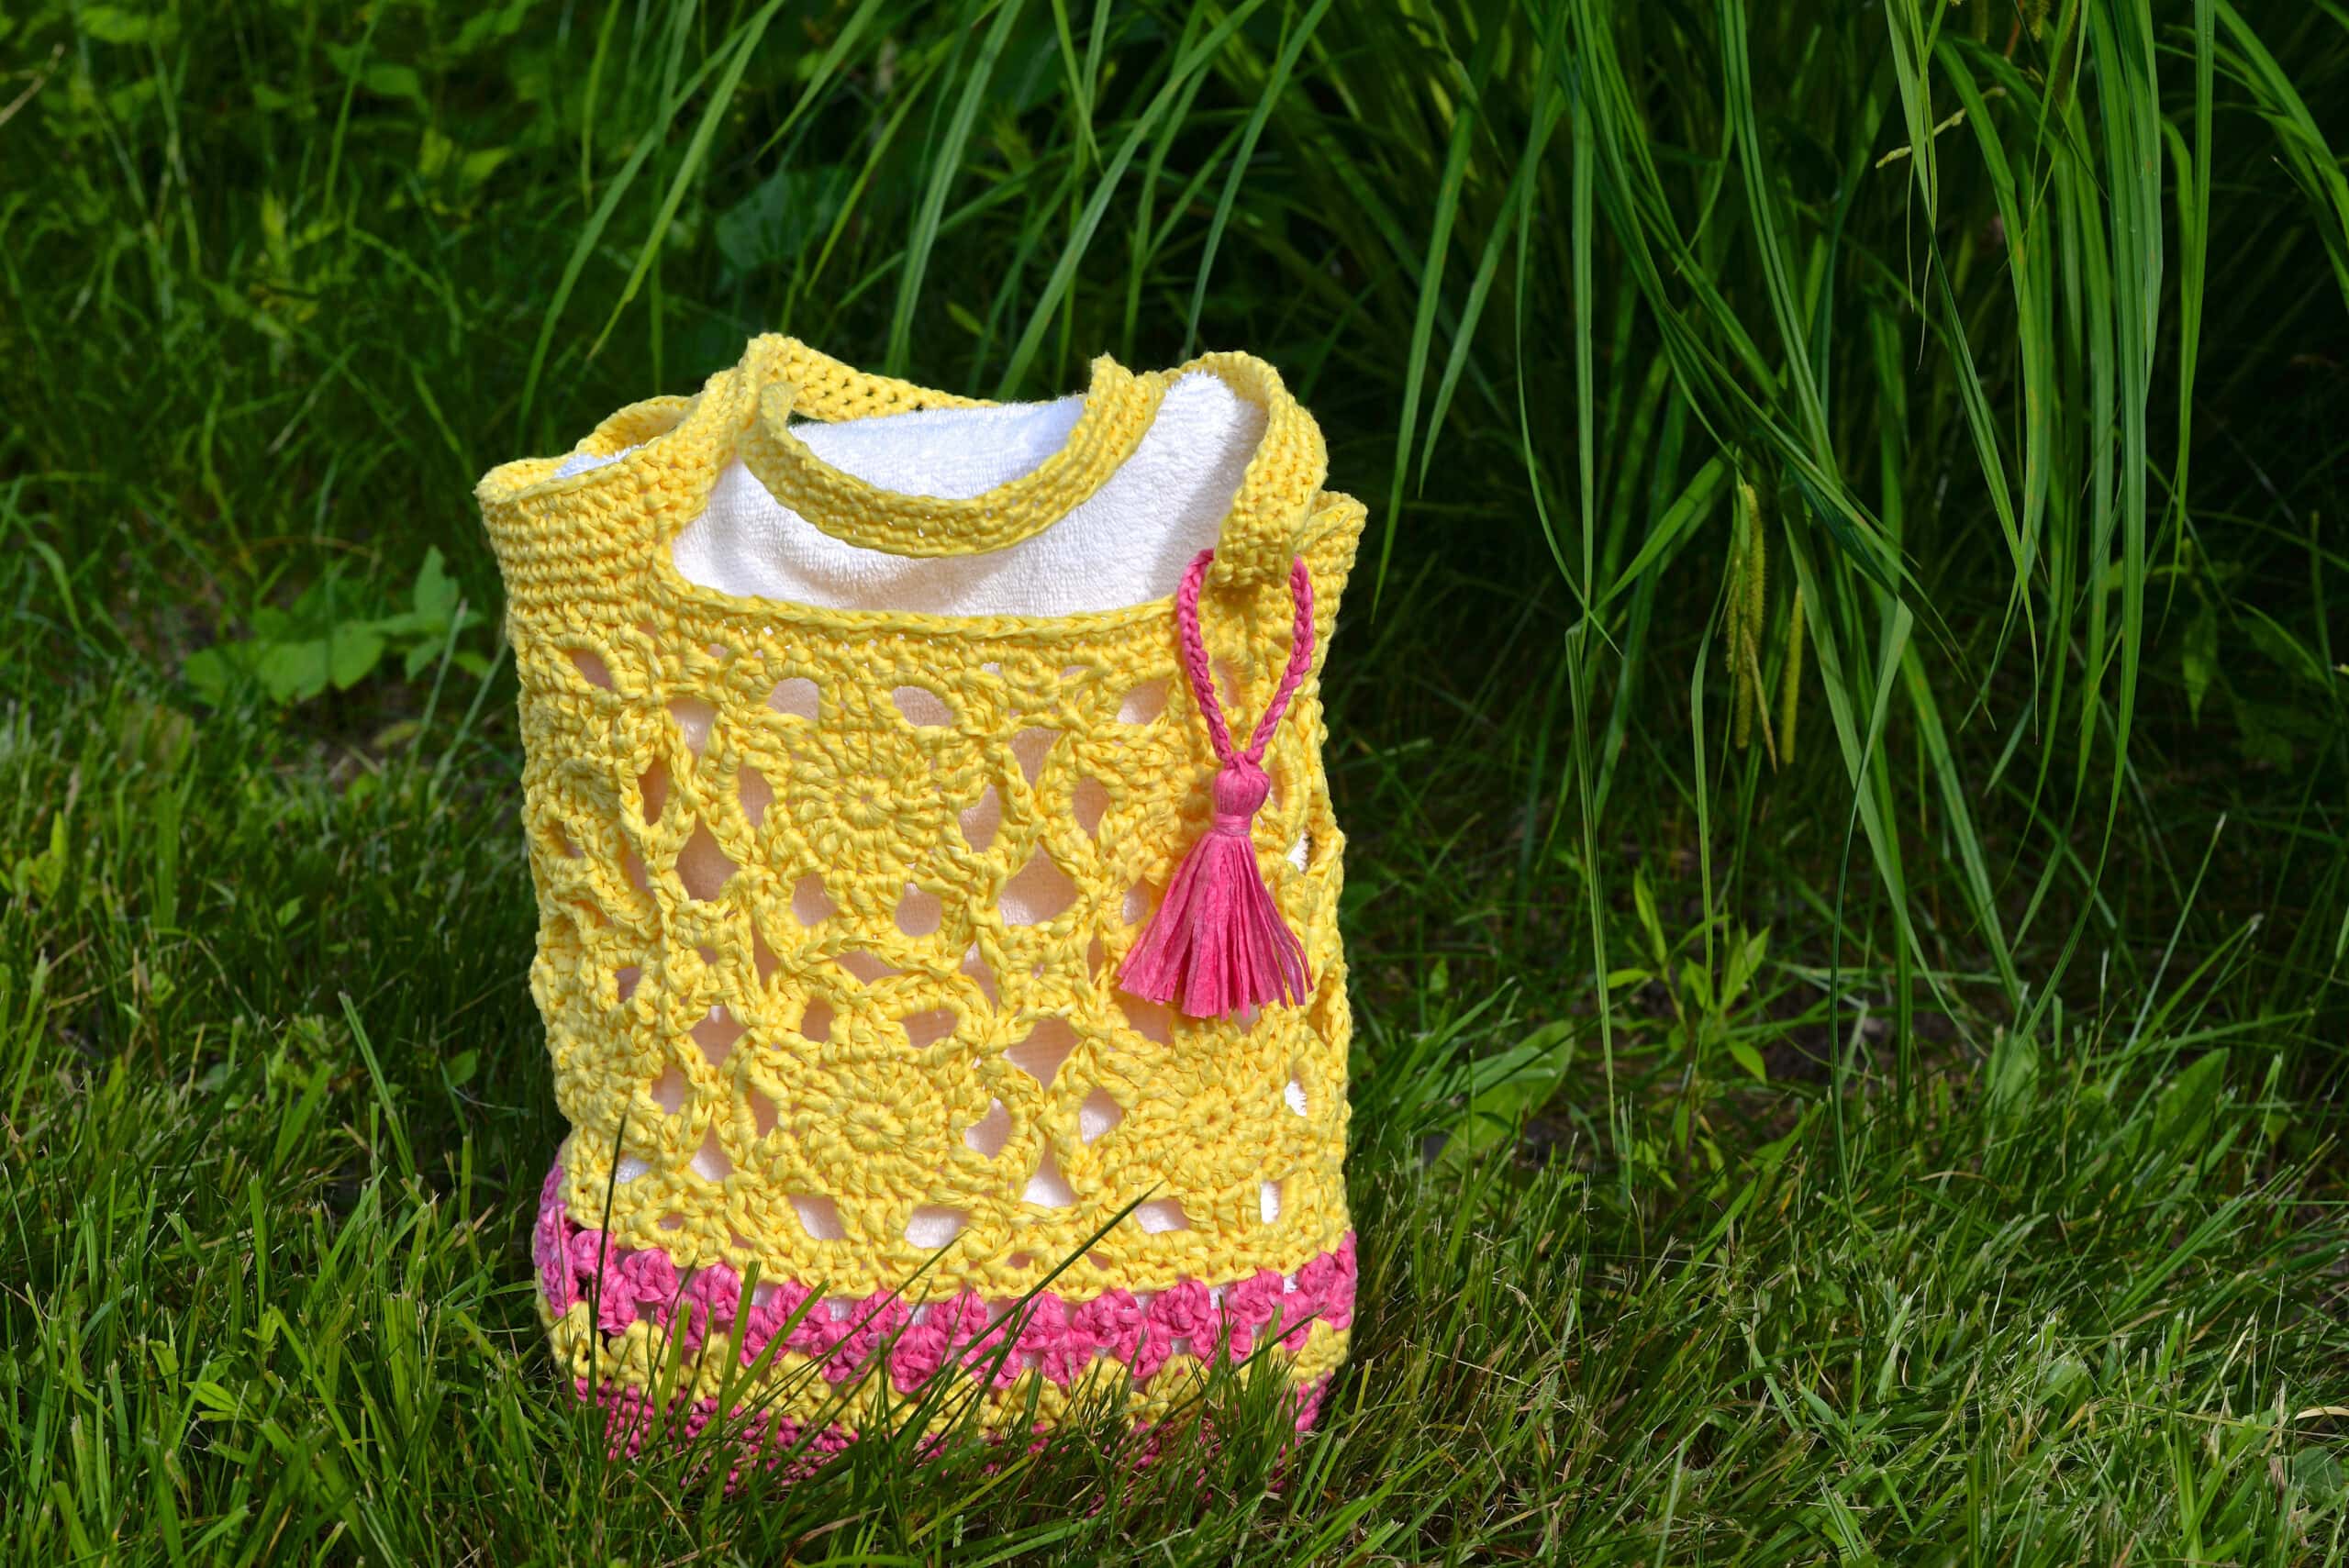 Pink and yellow flower motif crochet tote bag sitting on the grass.